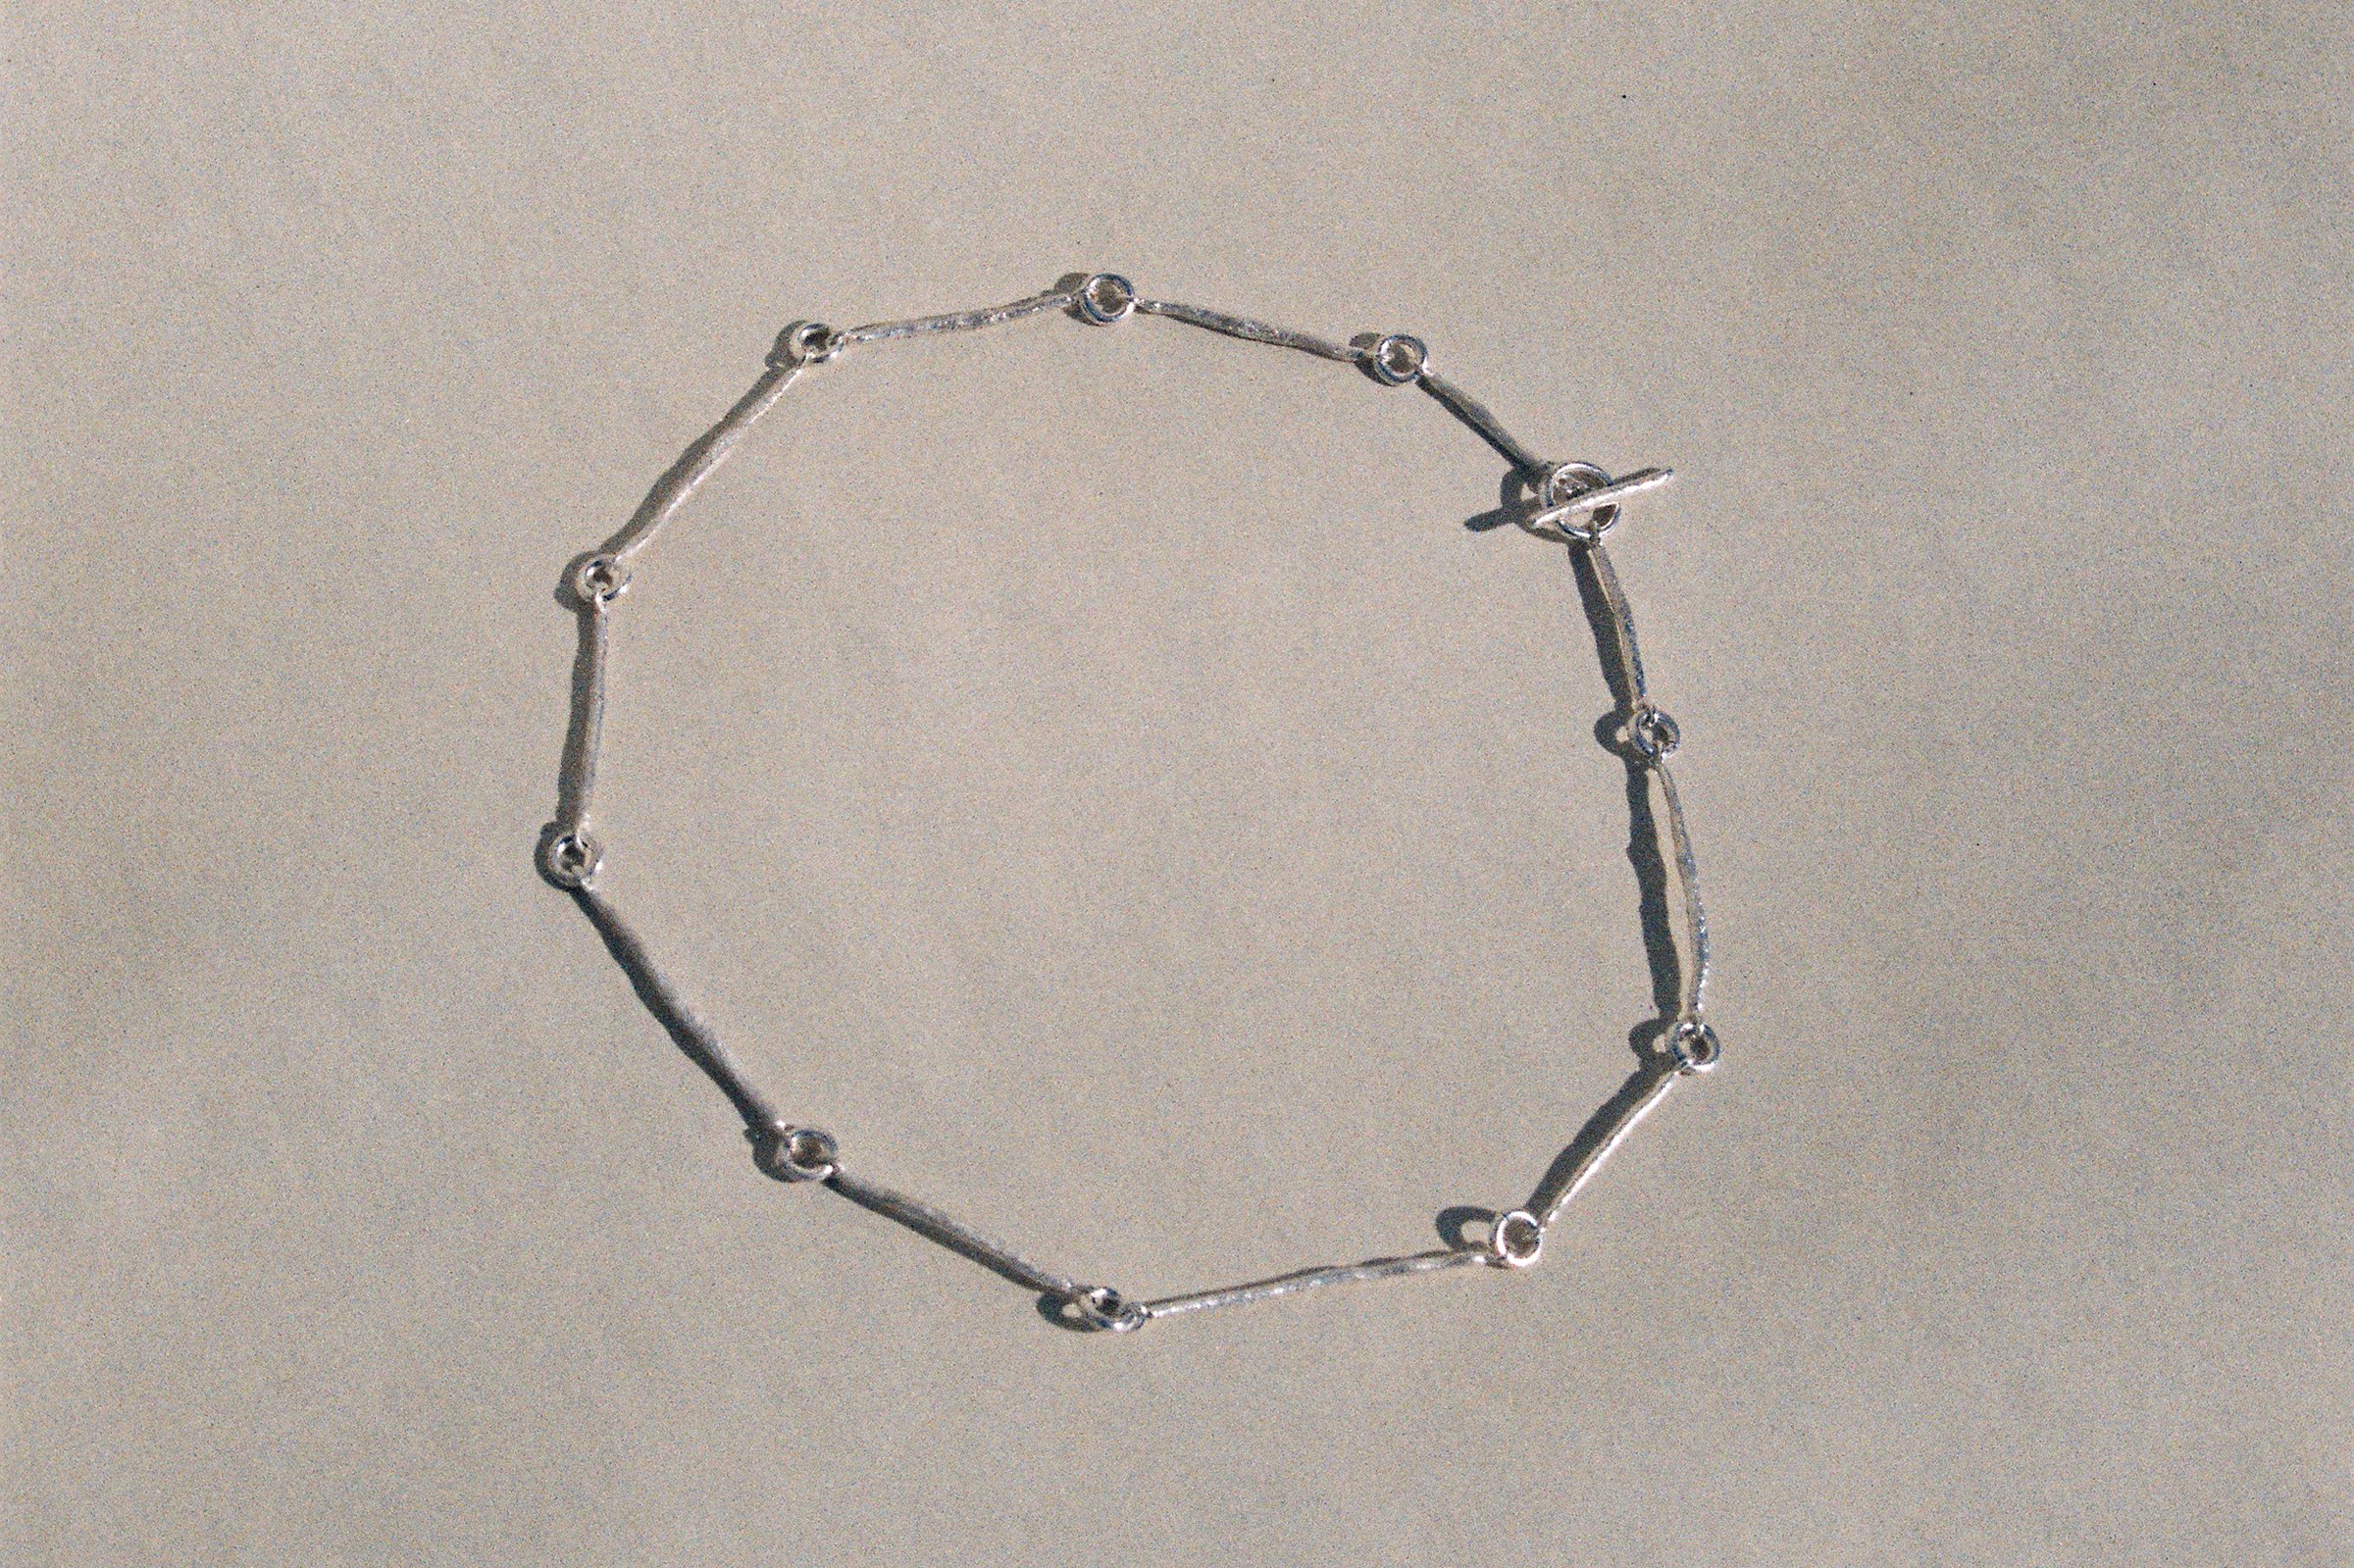 Image of Edition2. Piece25. Necklace